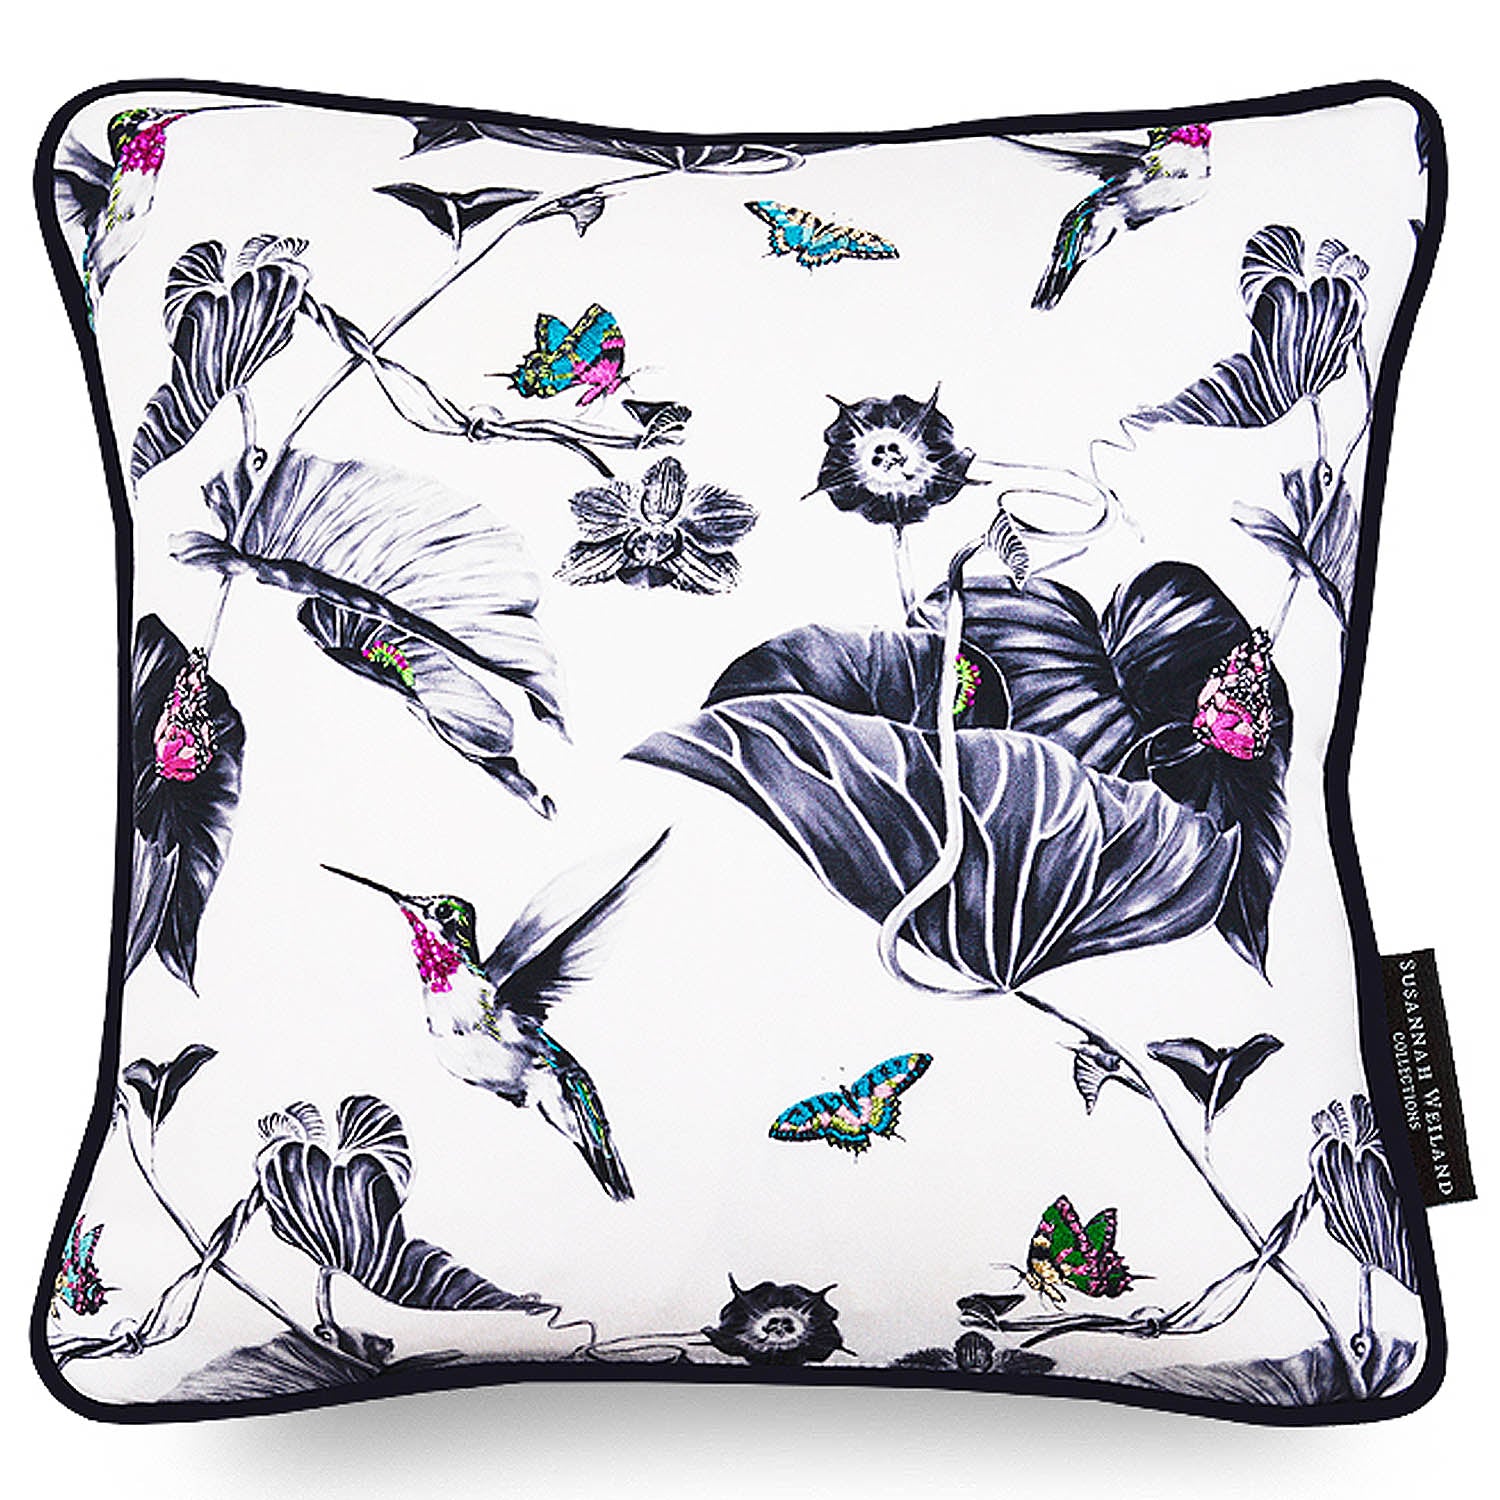 Mini cushion with Hummingbirds print and highlights of hand embroidery